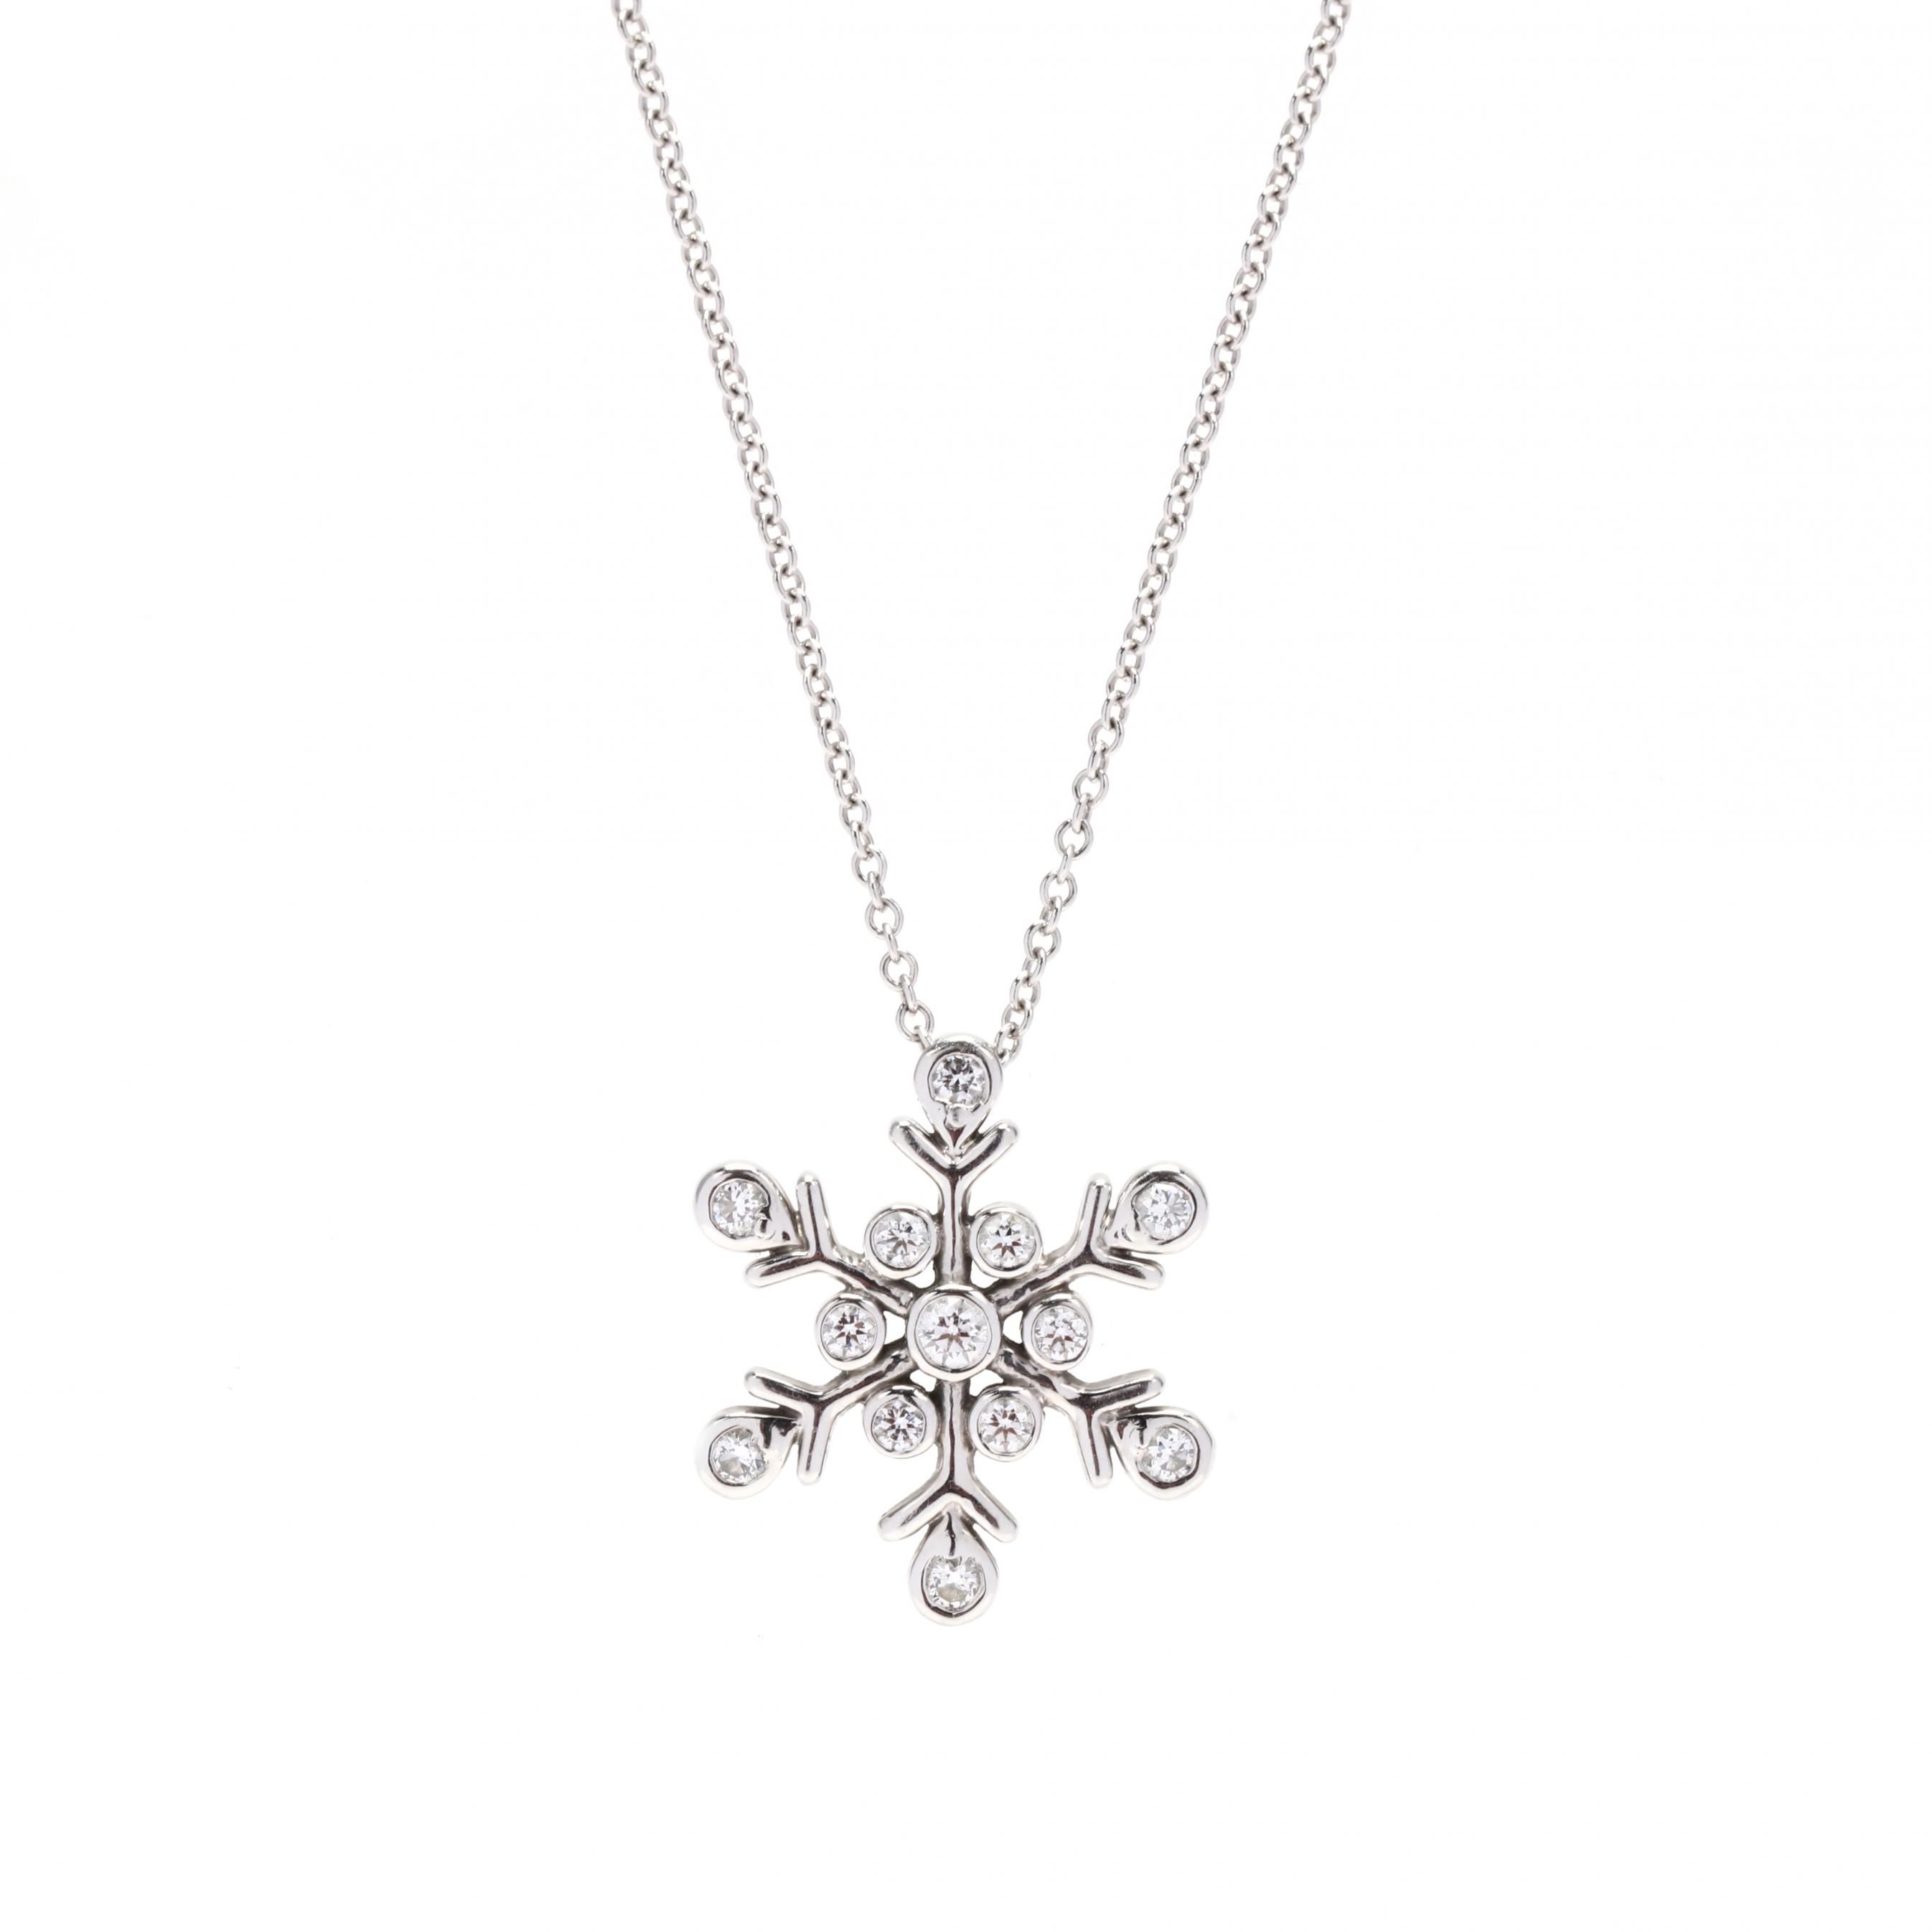 Small Snowflake Necklace in Sterling Silver – SnowJewel